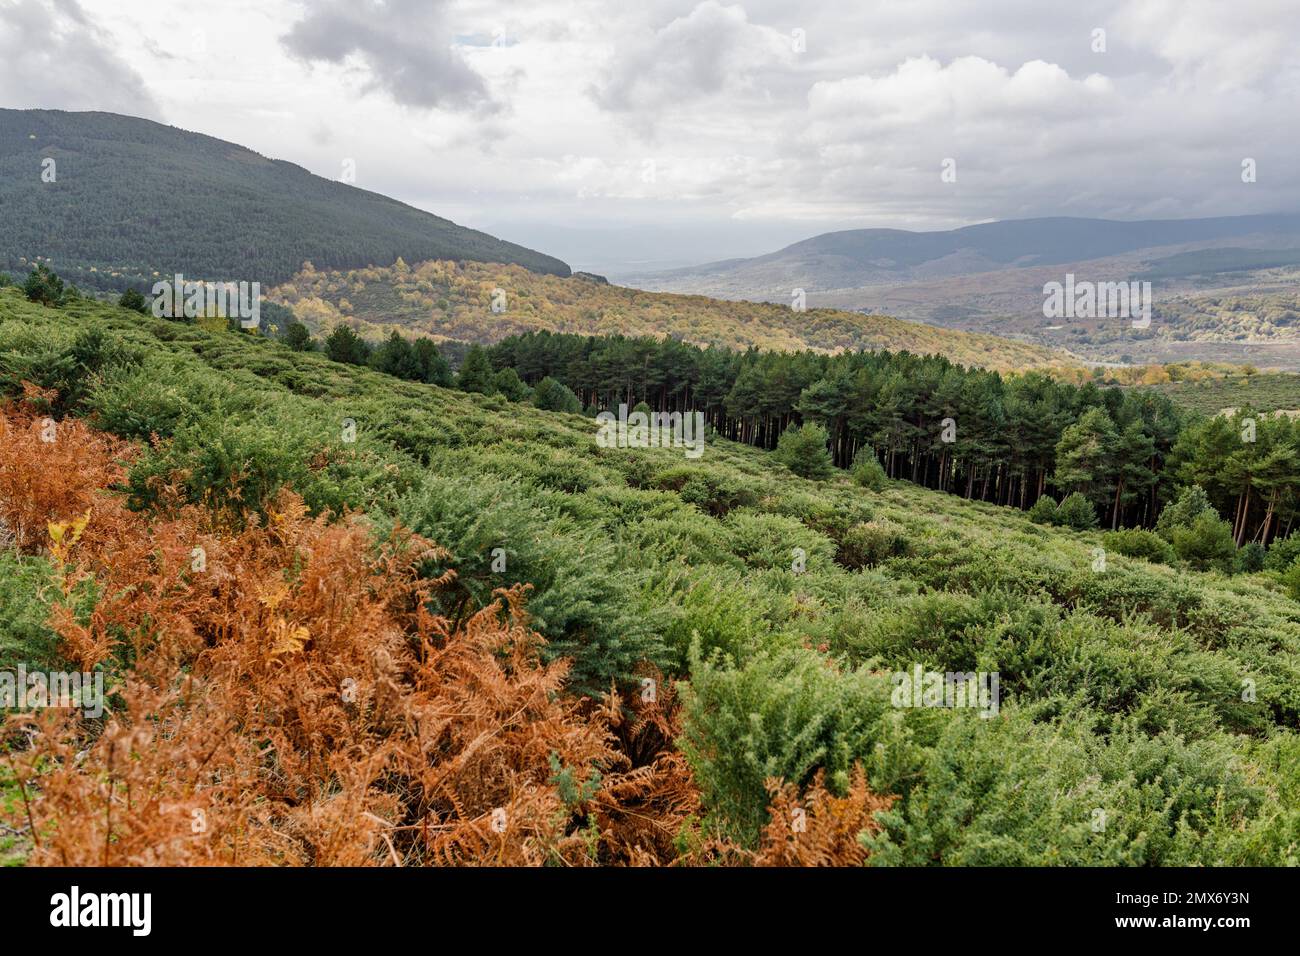 View of the Sierra de Guadarrama with stripes of ocher colors and different shades of green and a cloudy stormy sky. Stock Photo